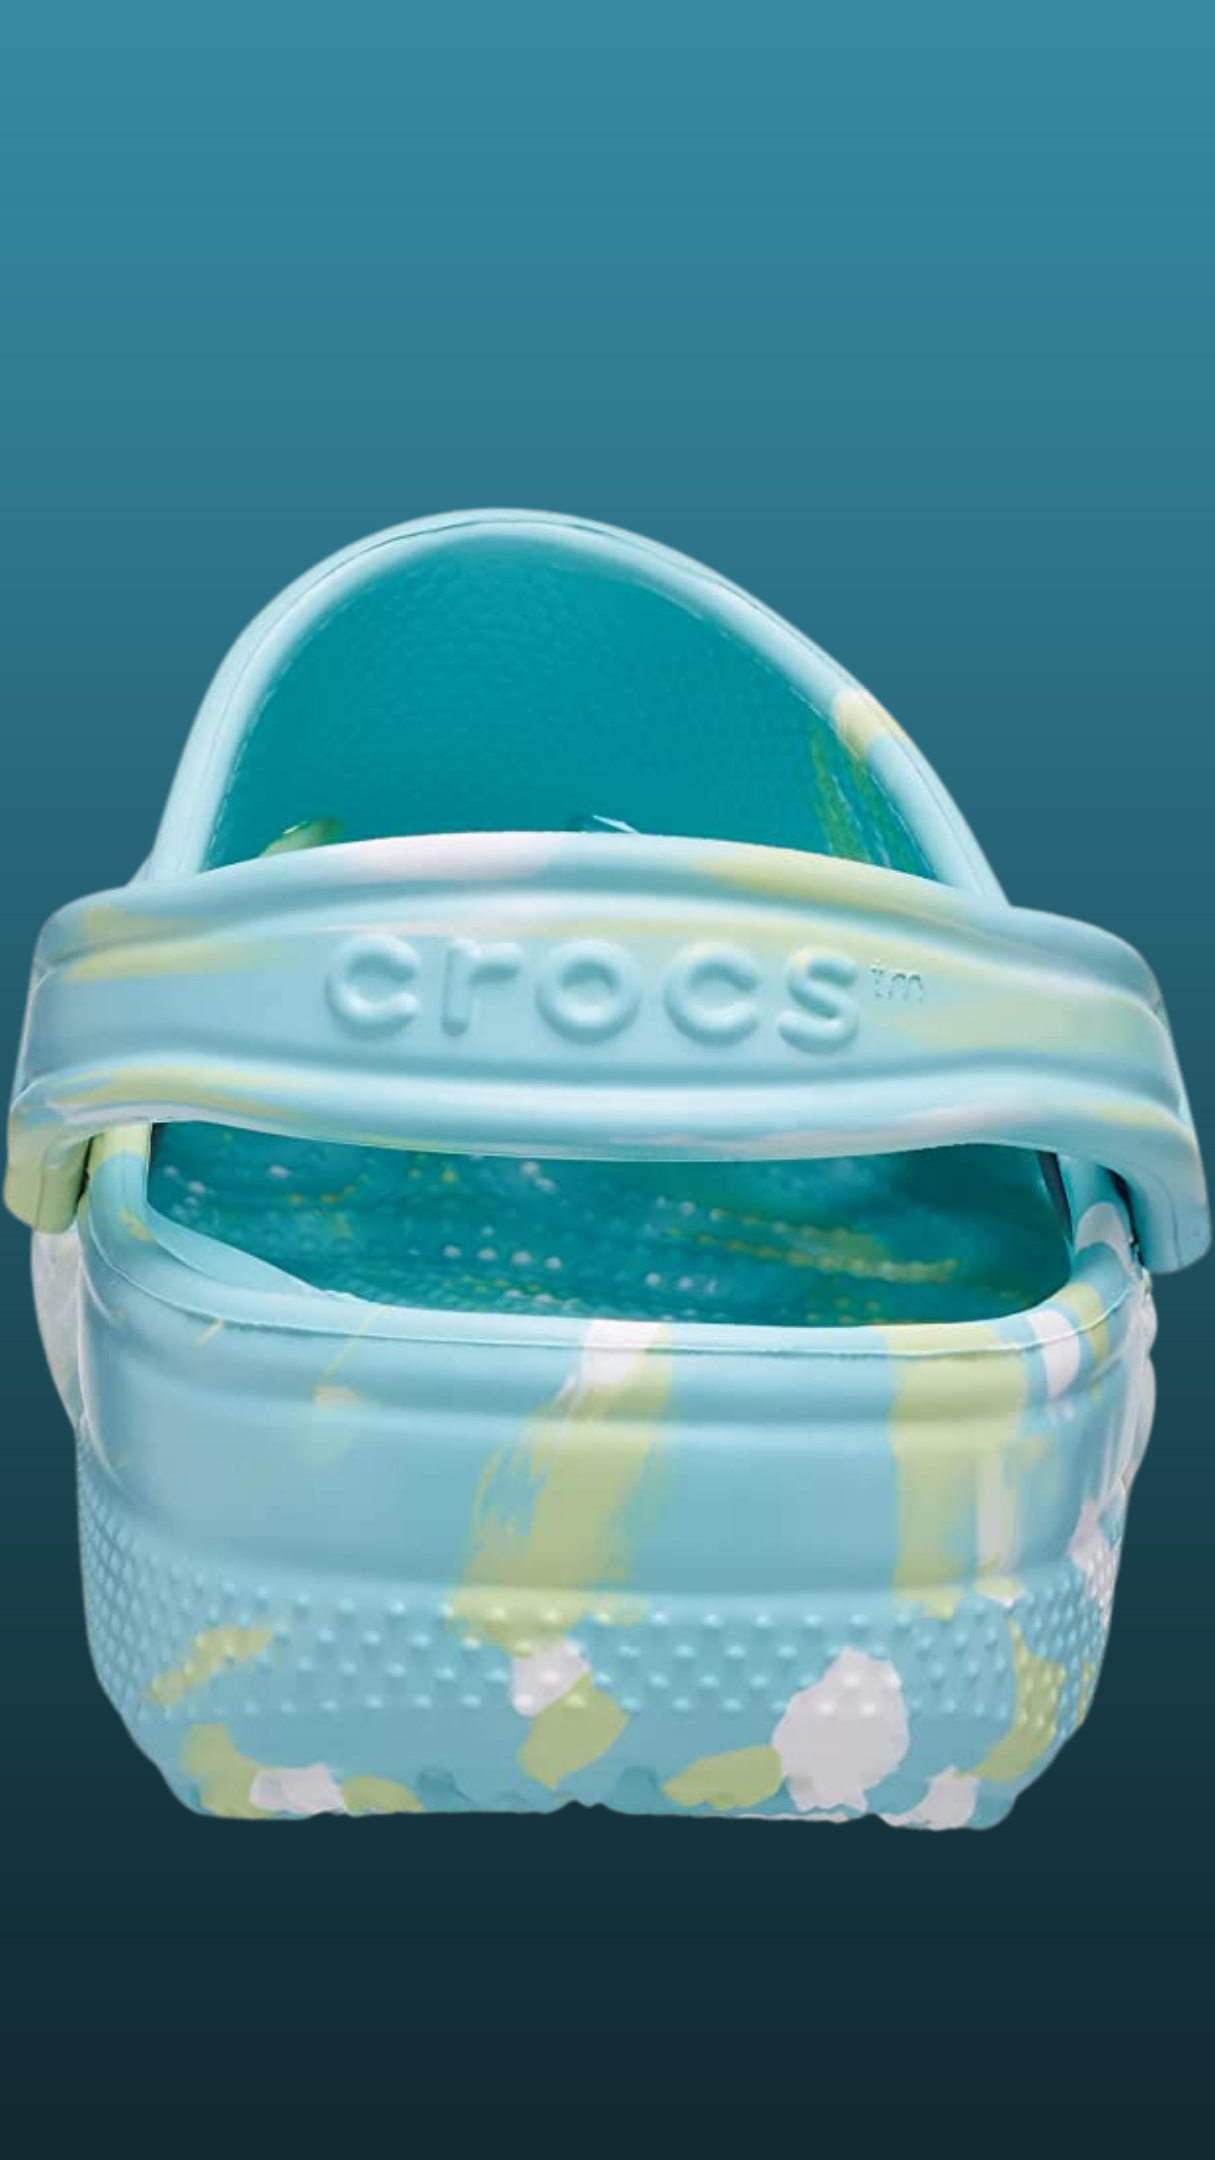 SOLD OUT - Crocs Unisex-Adult Classic Marbled Tie-dye Clog | GreenLifeHuman Emporium